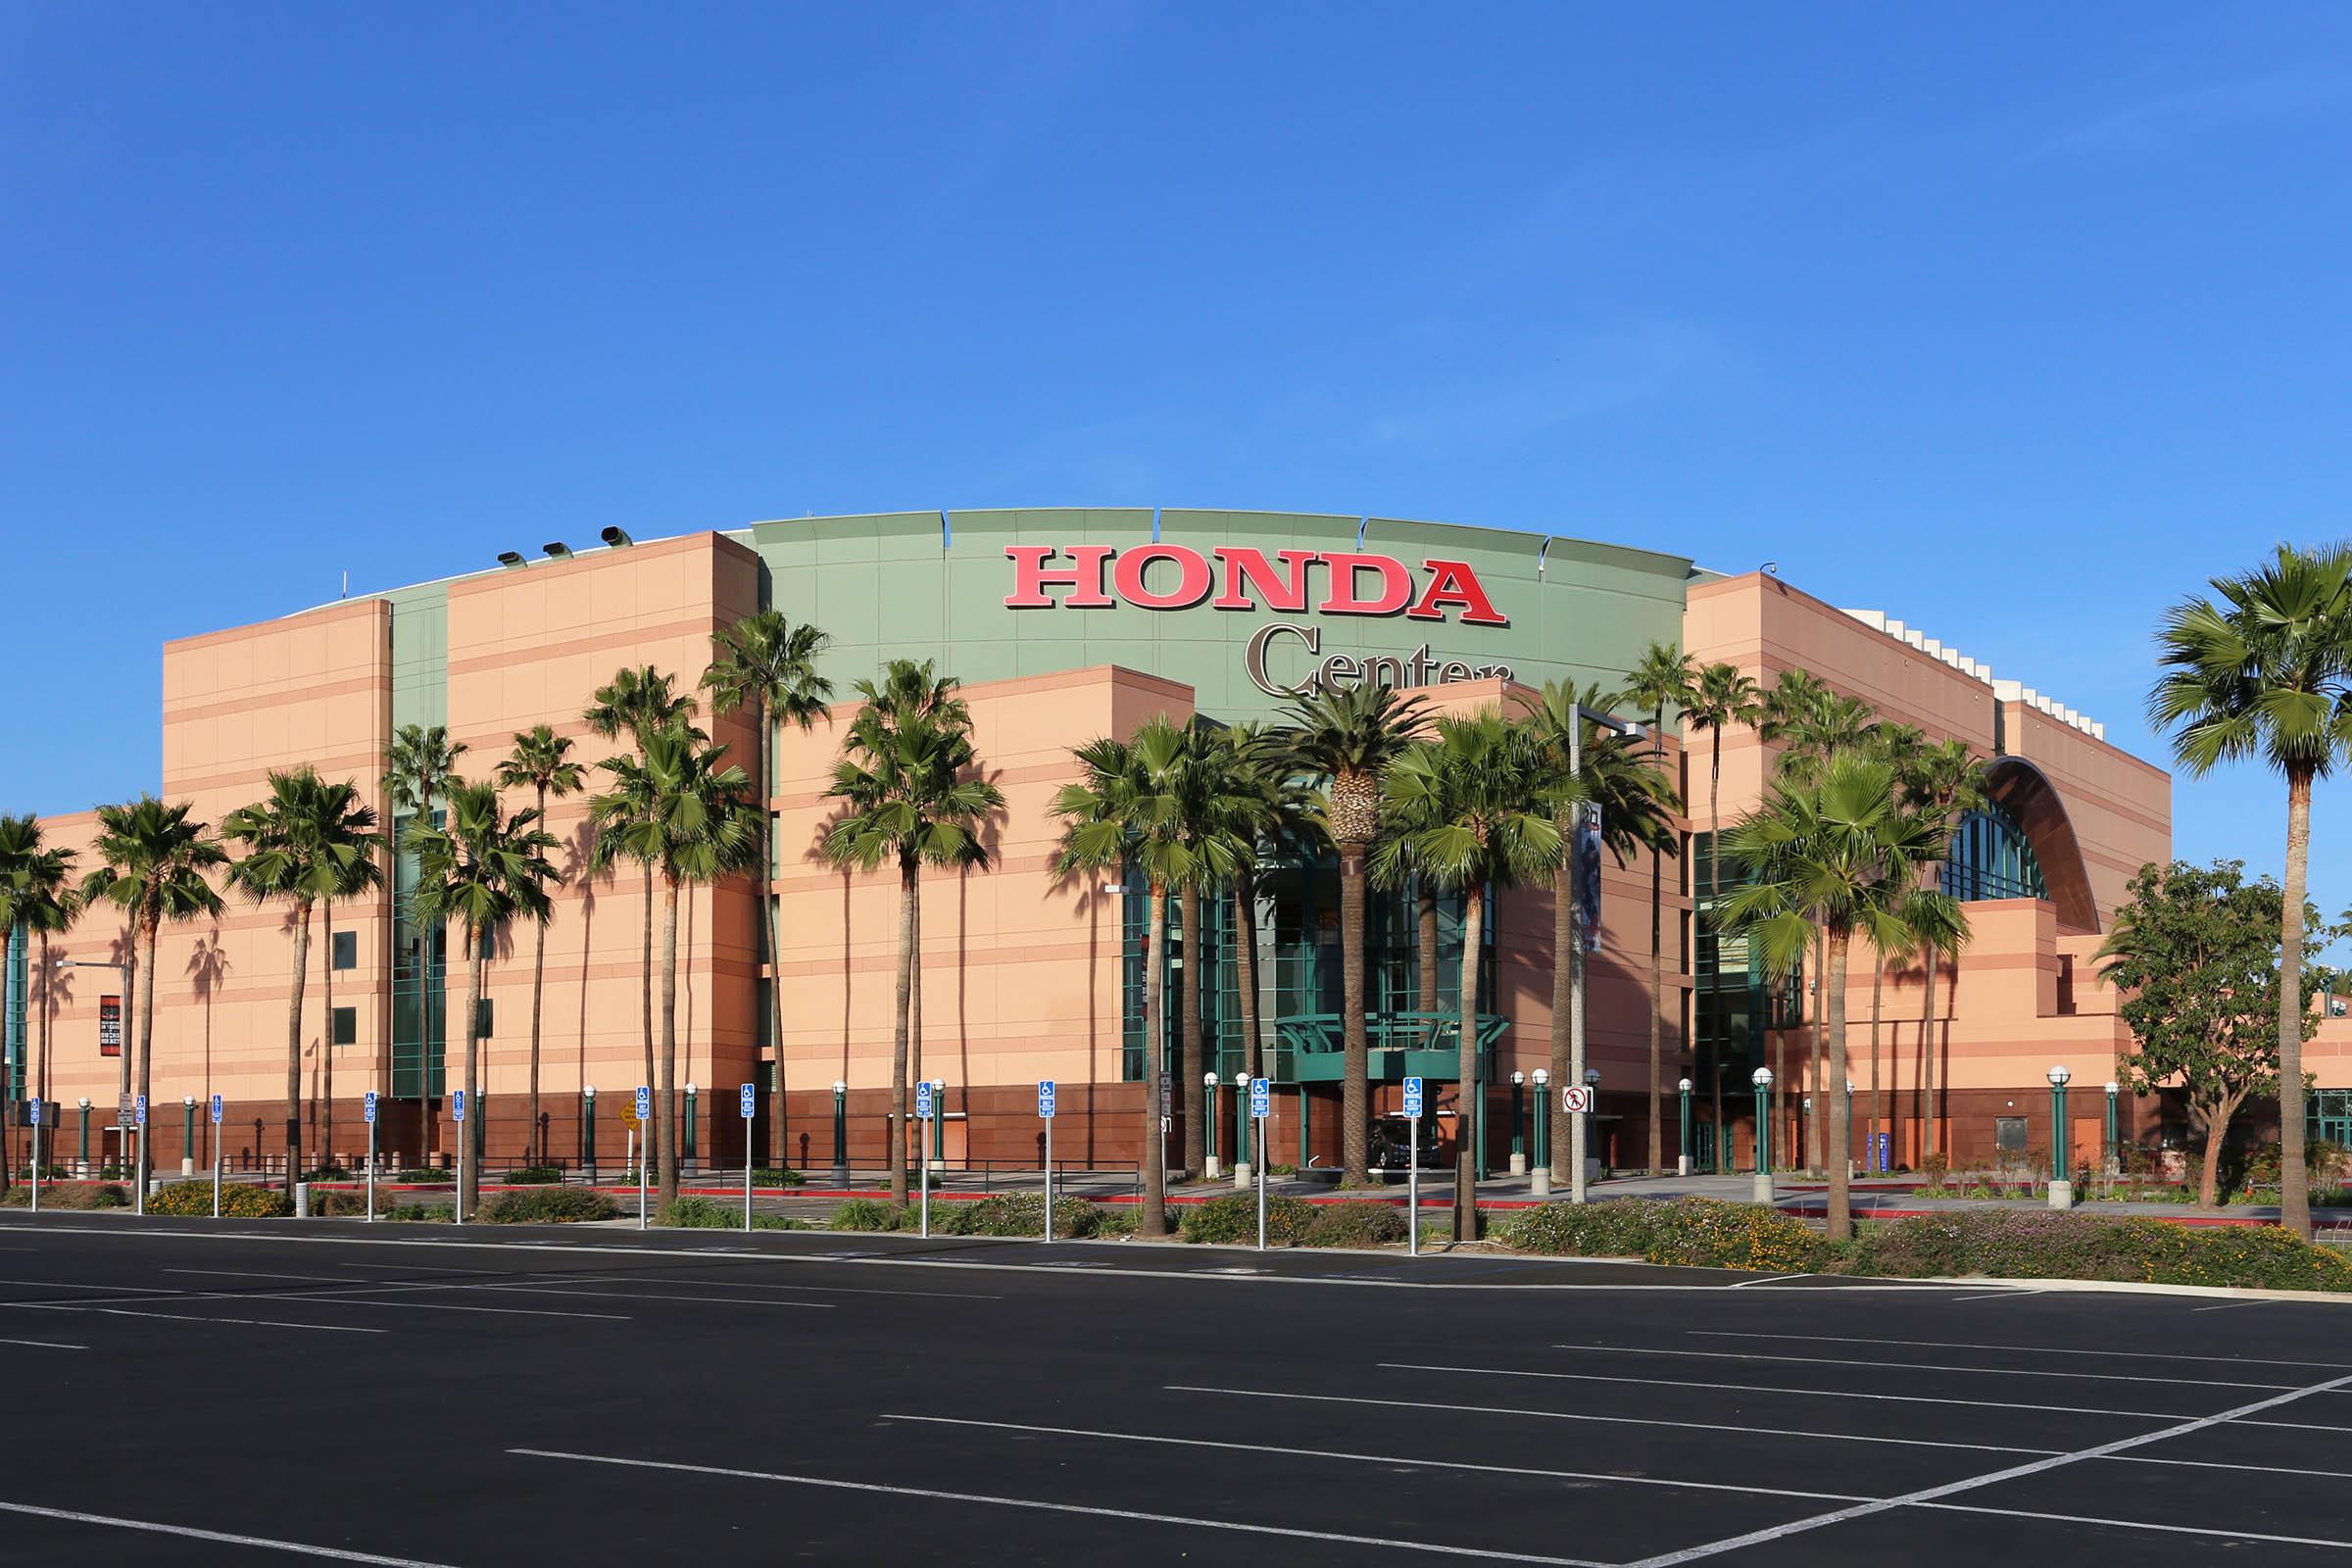 Honda Center that has a sign on the side of a road